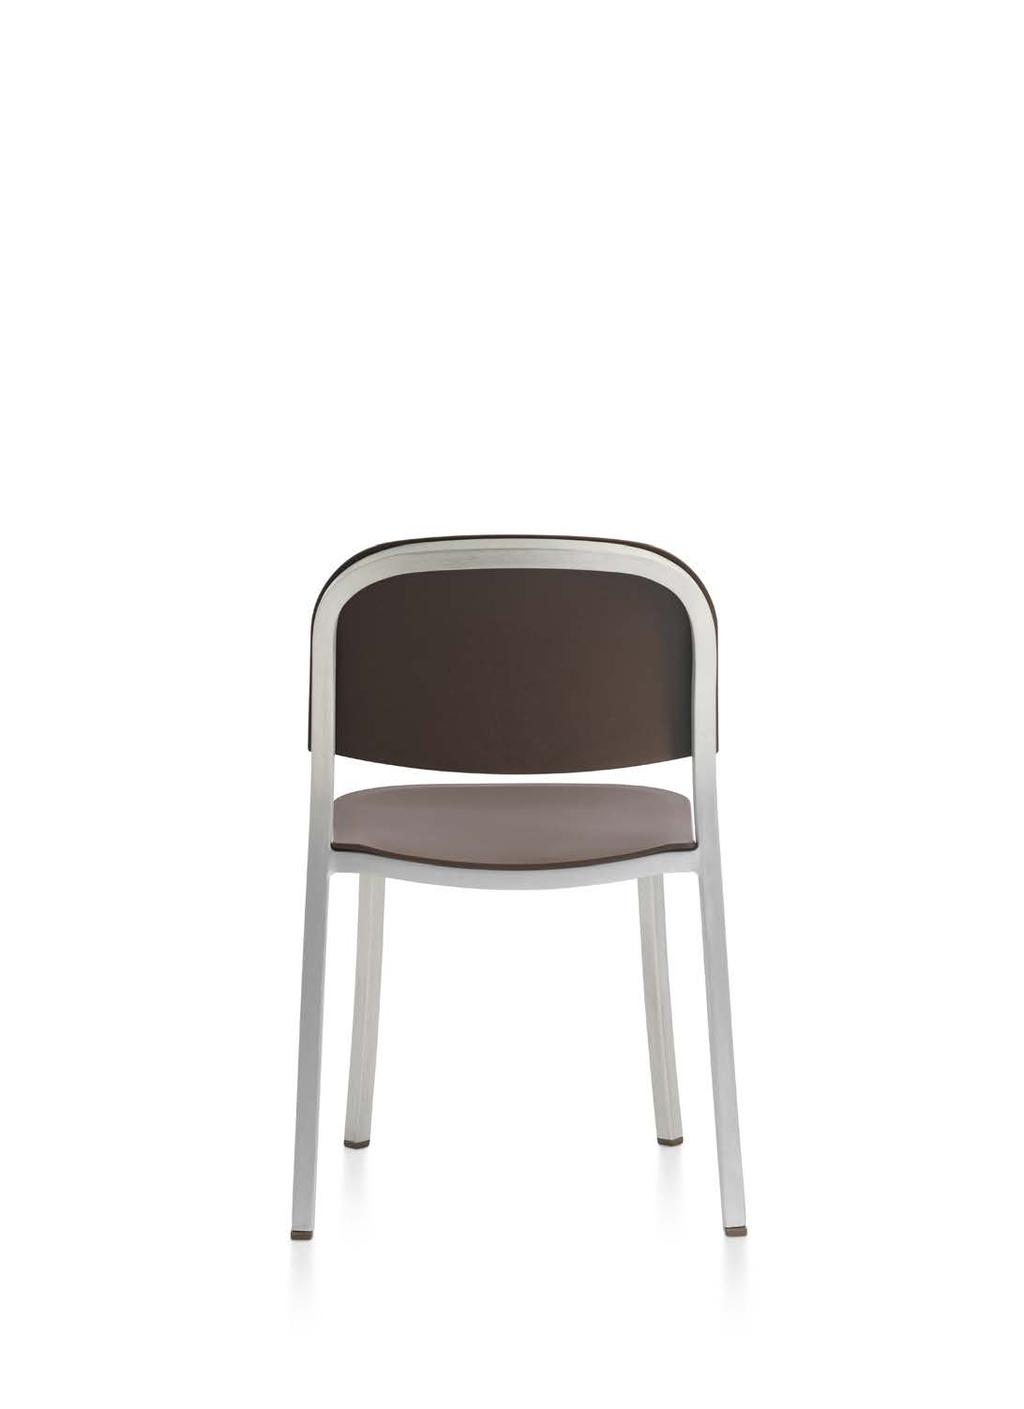 1 Inch chair with Dark Brown